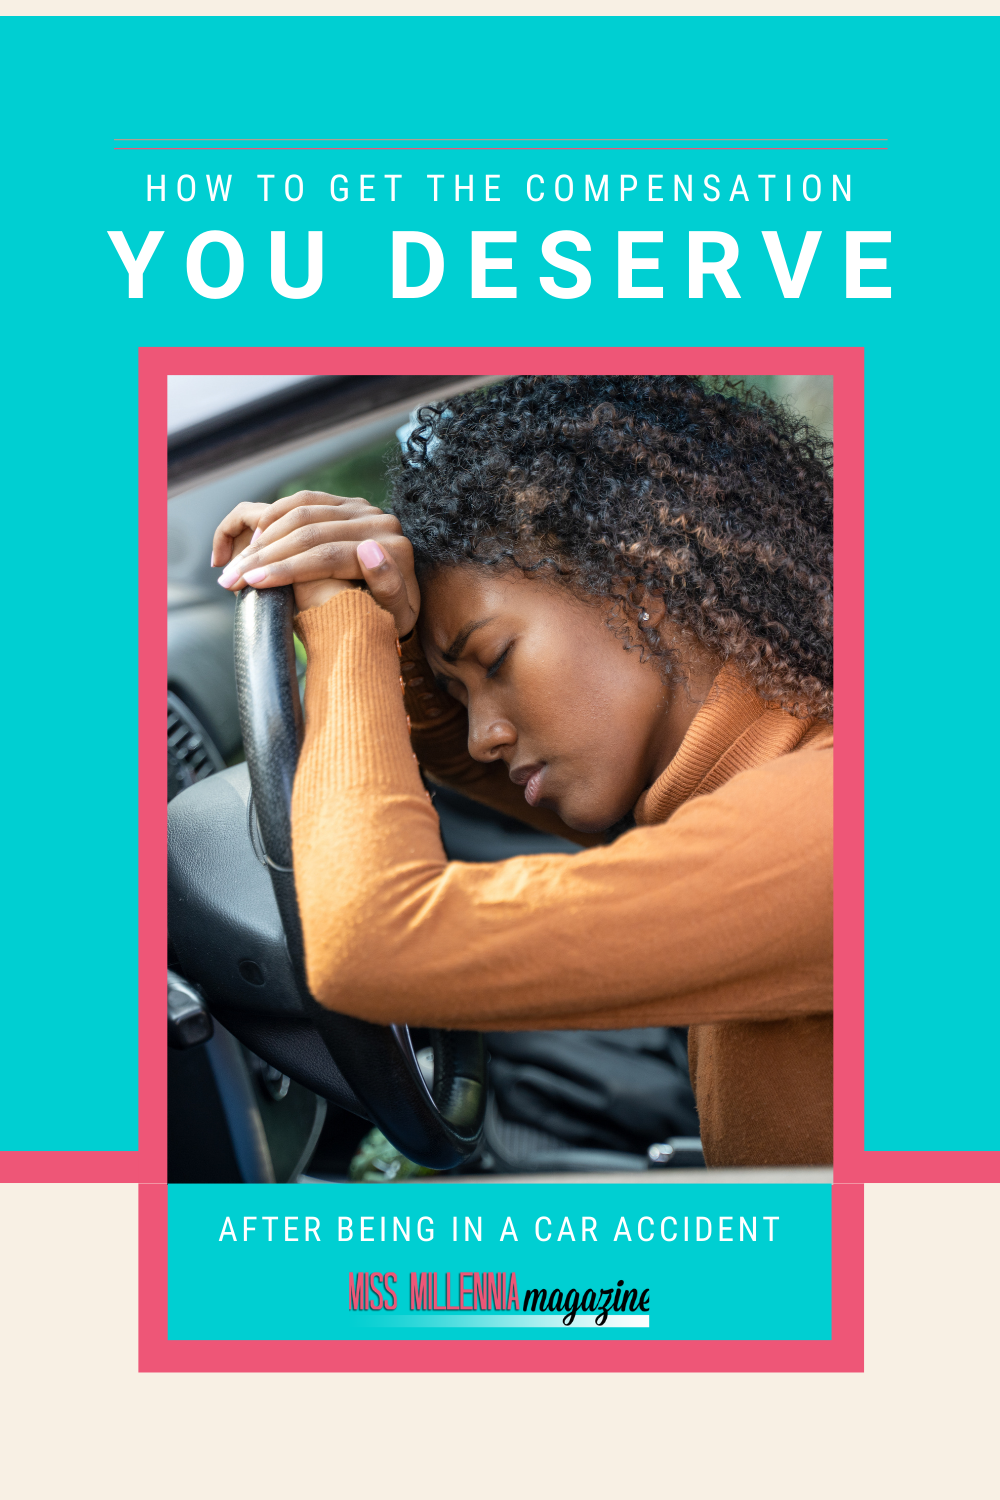 How To Get The Compensation You Deserve After Being In A Car Accident